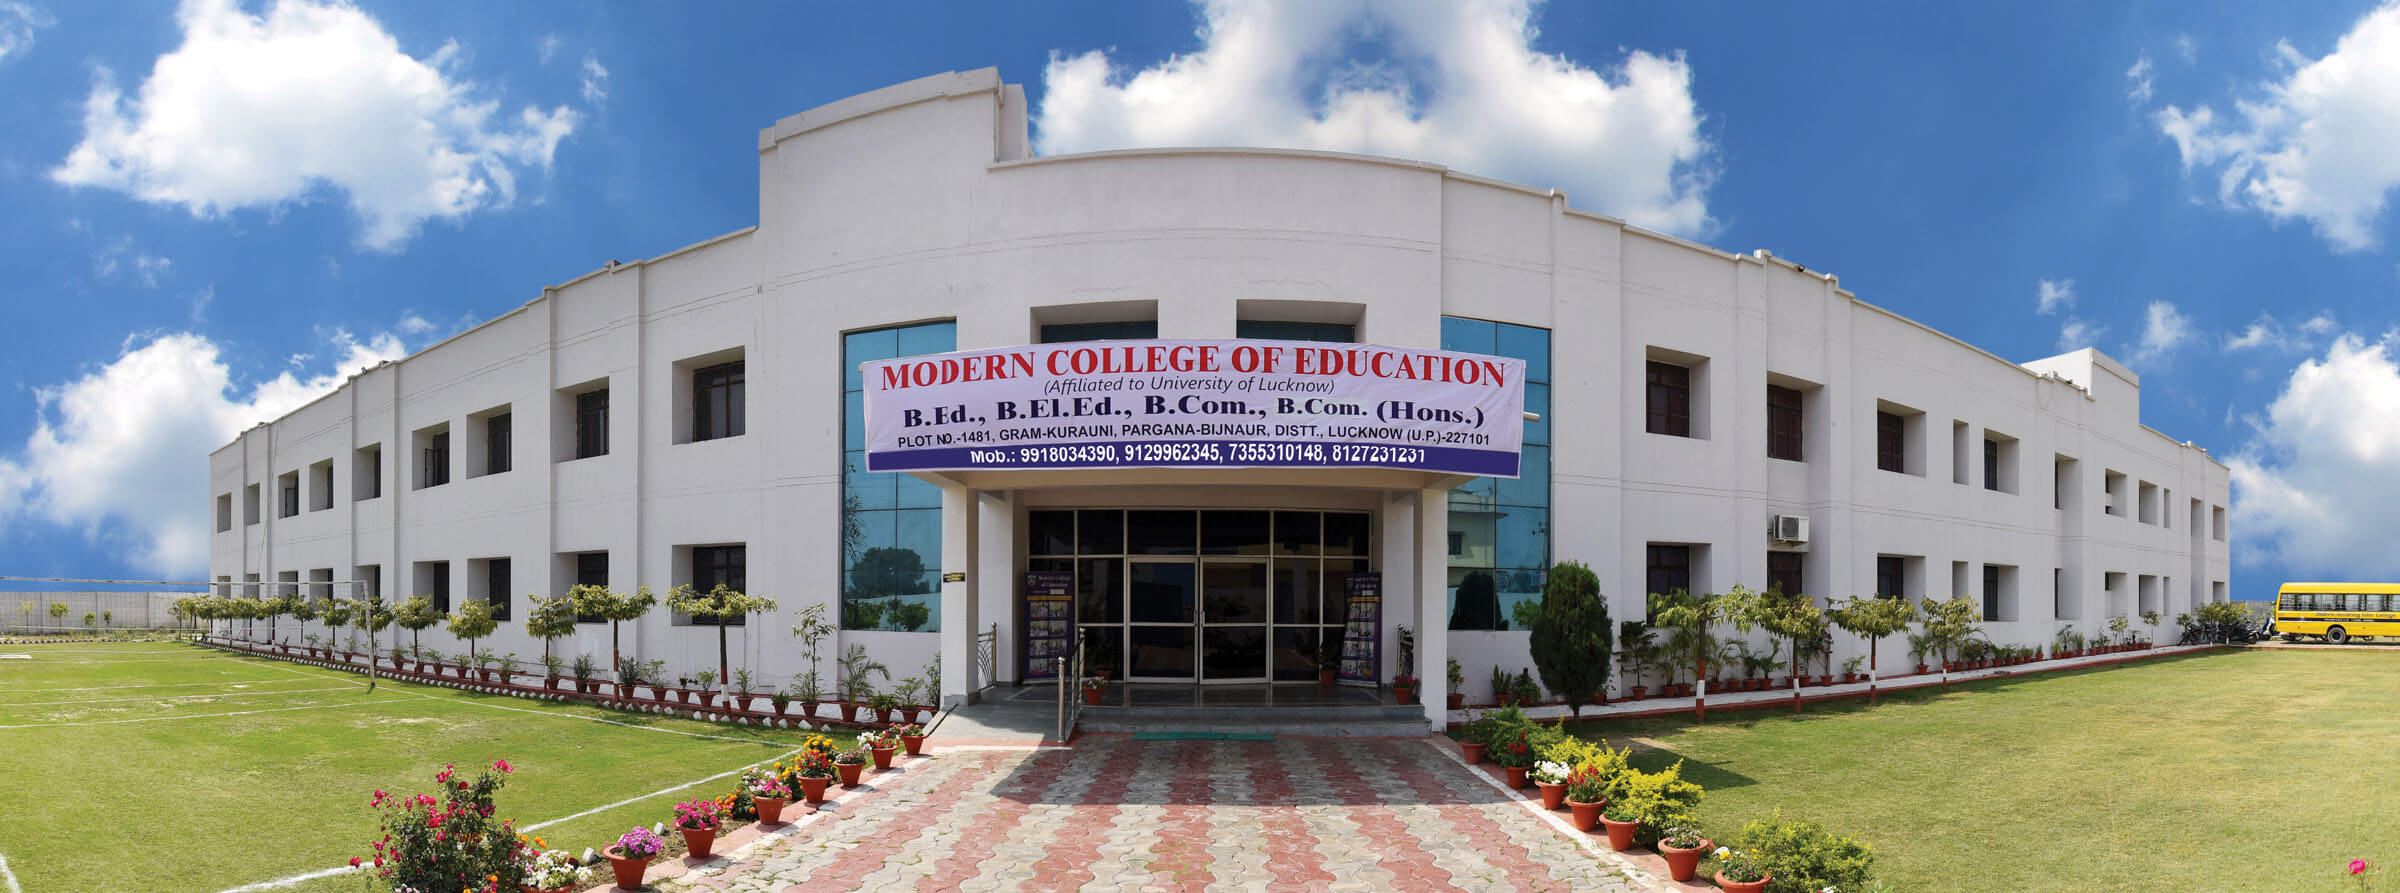 Modern College of Education